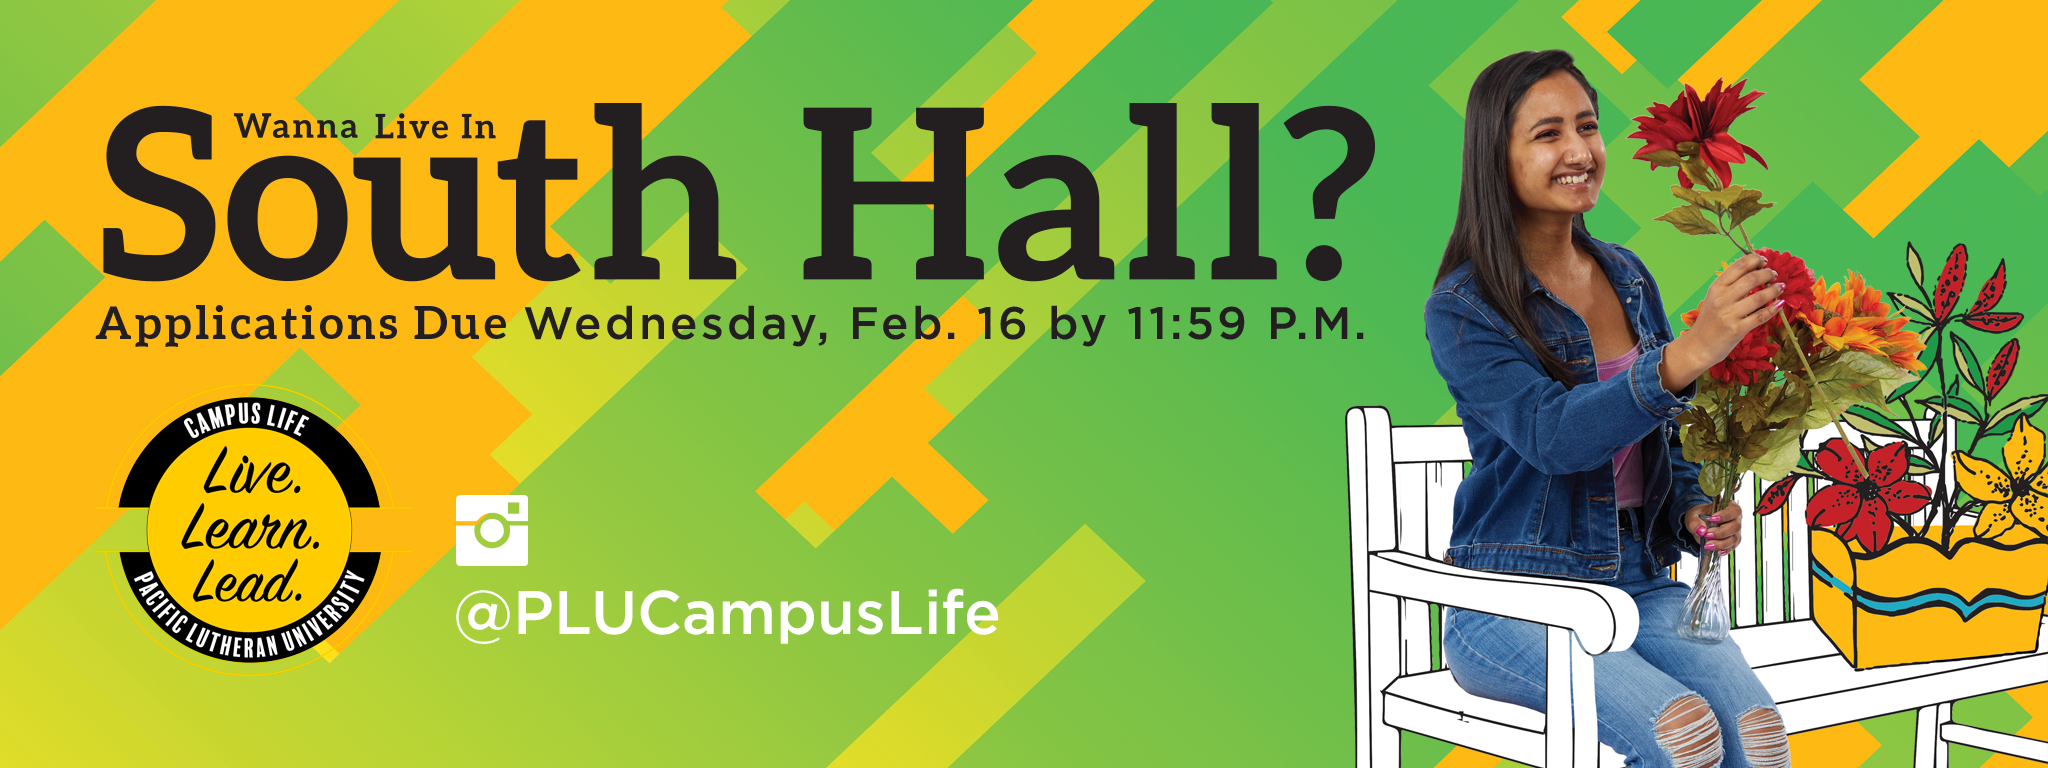 Wanna Live in South Hall?